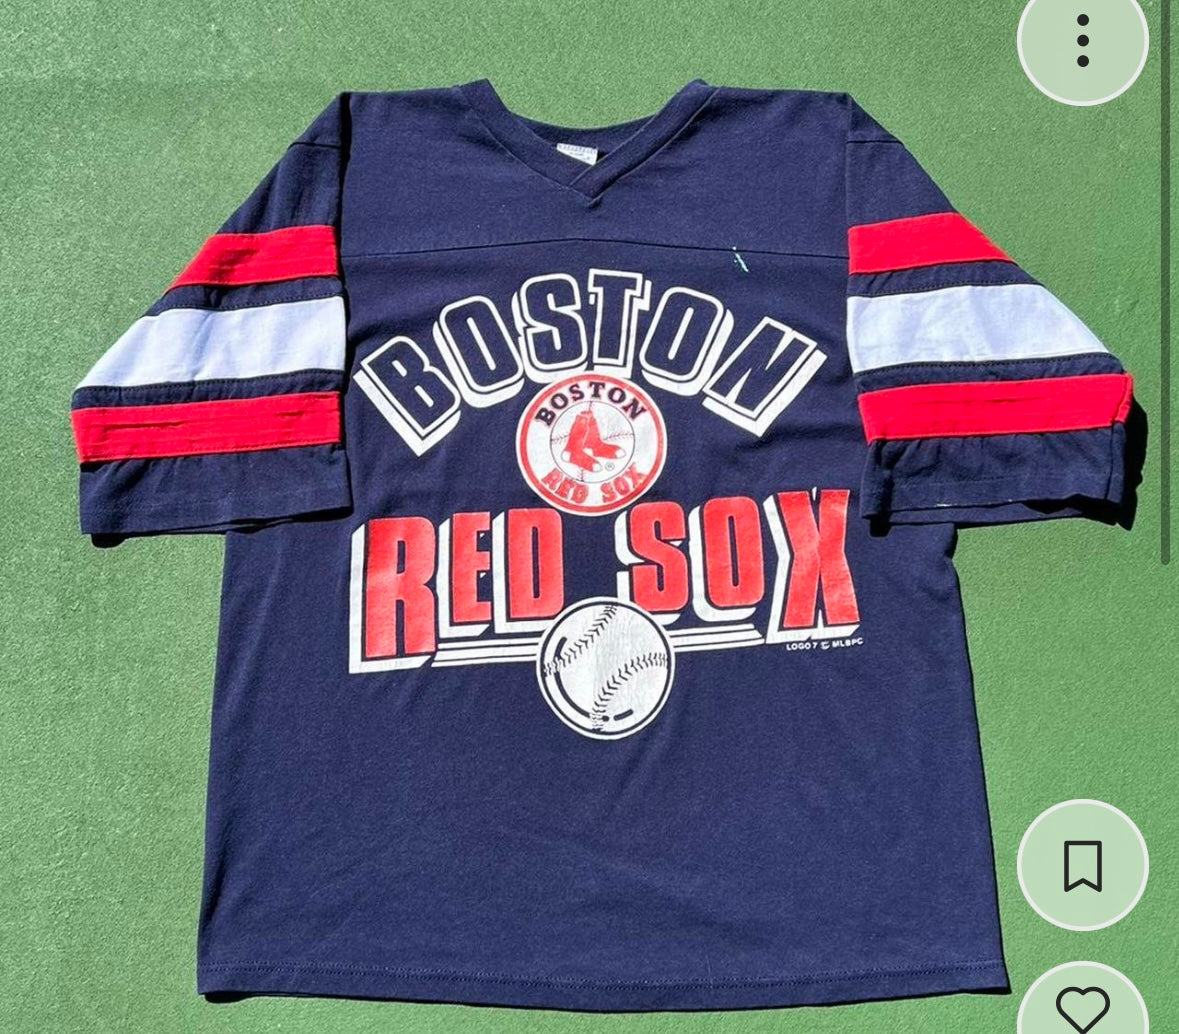 Red Sox tee